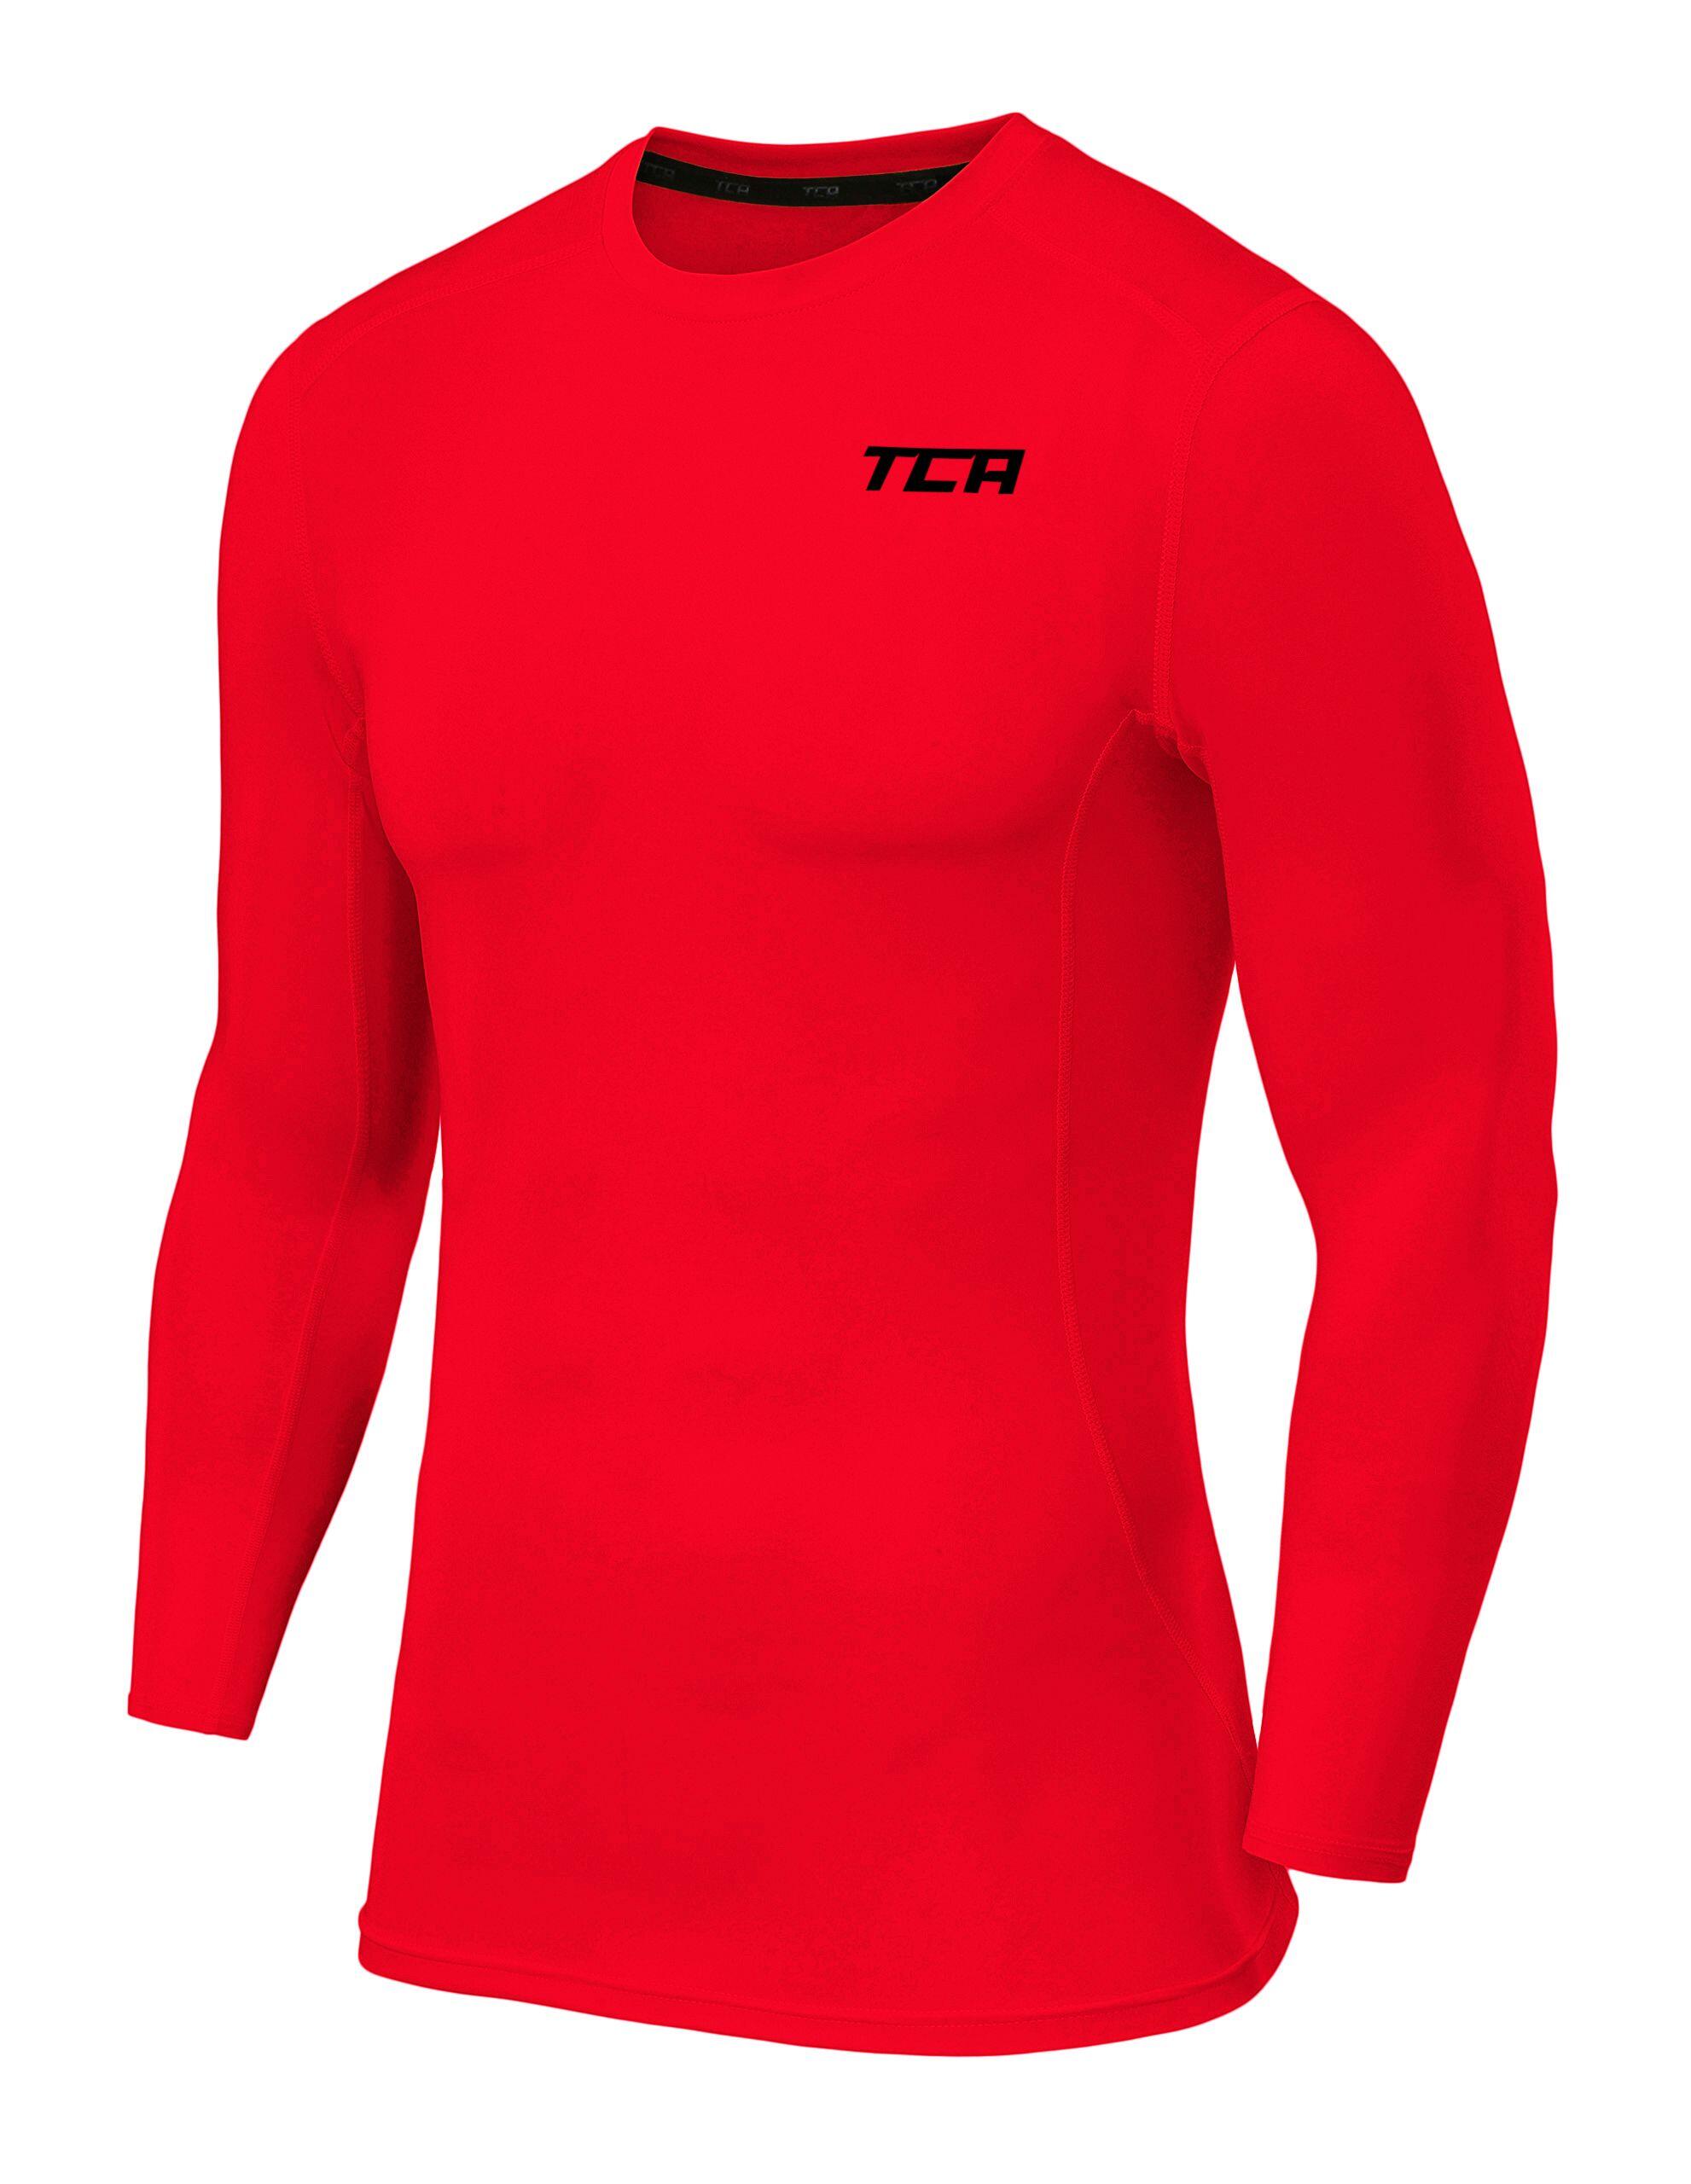 TCA Boys' Performance Base Layer Compression Top - High Risk Red